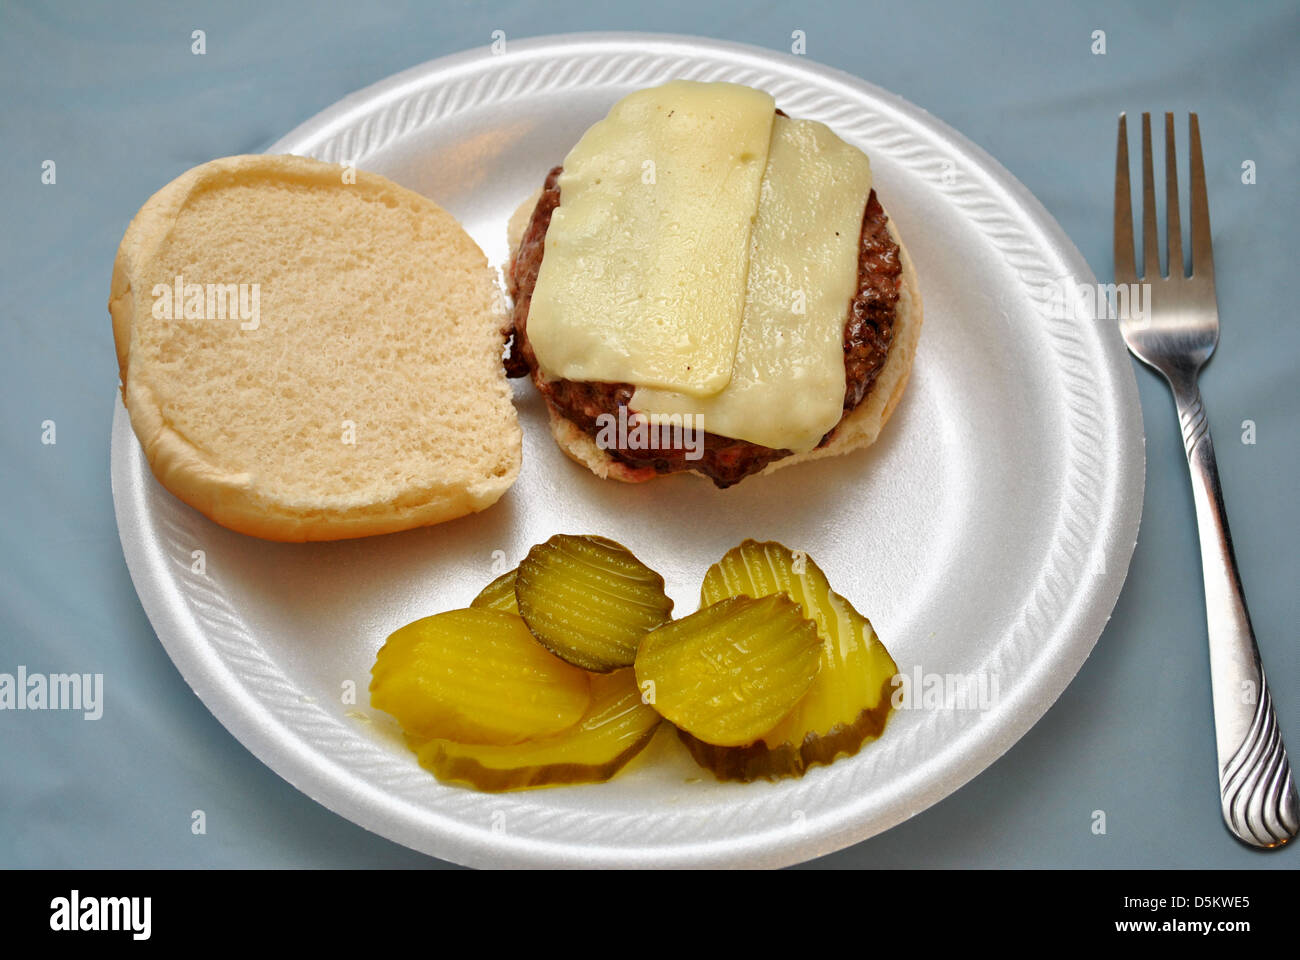 Tasty Burger with Pickle Chips Stock Photo